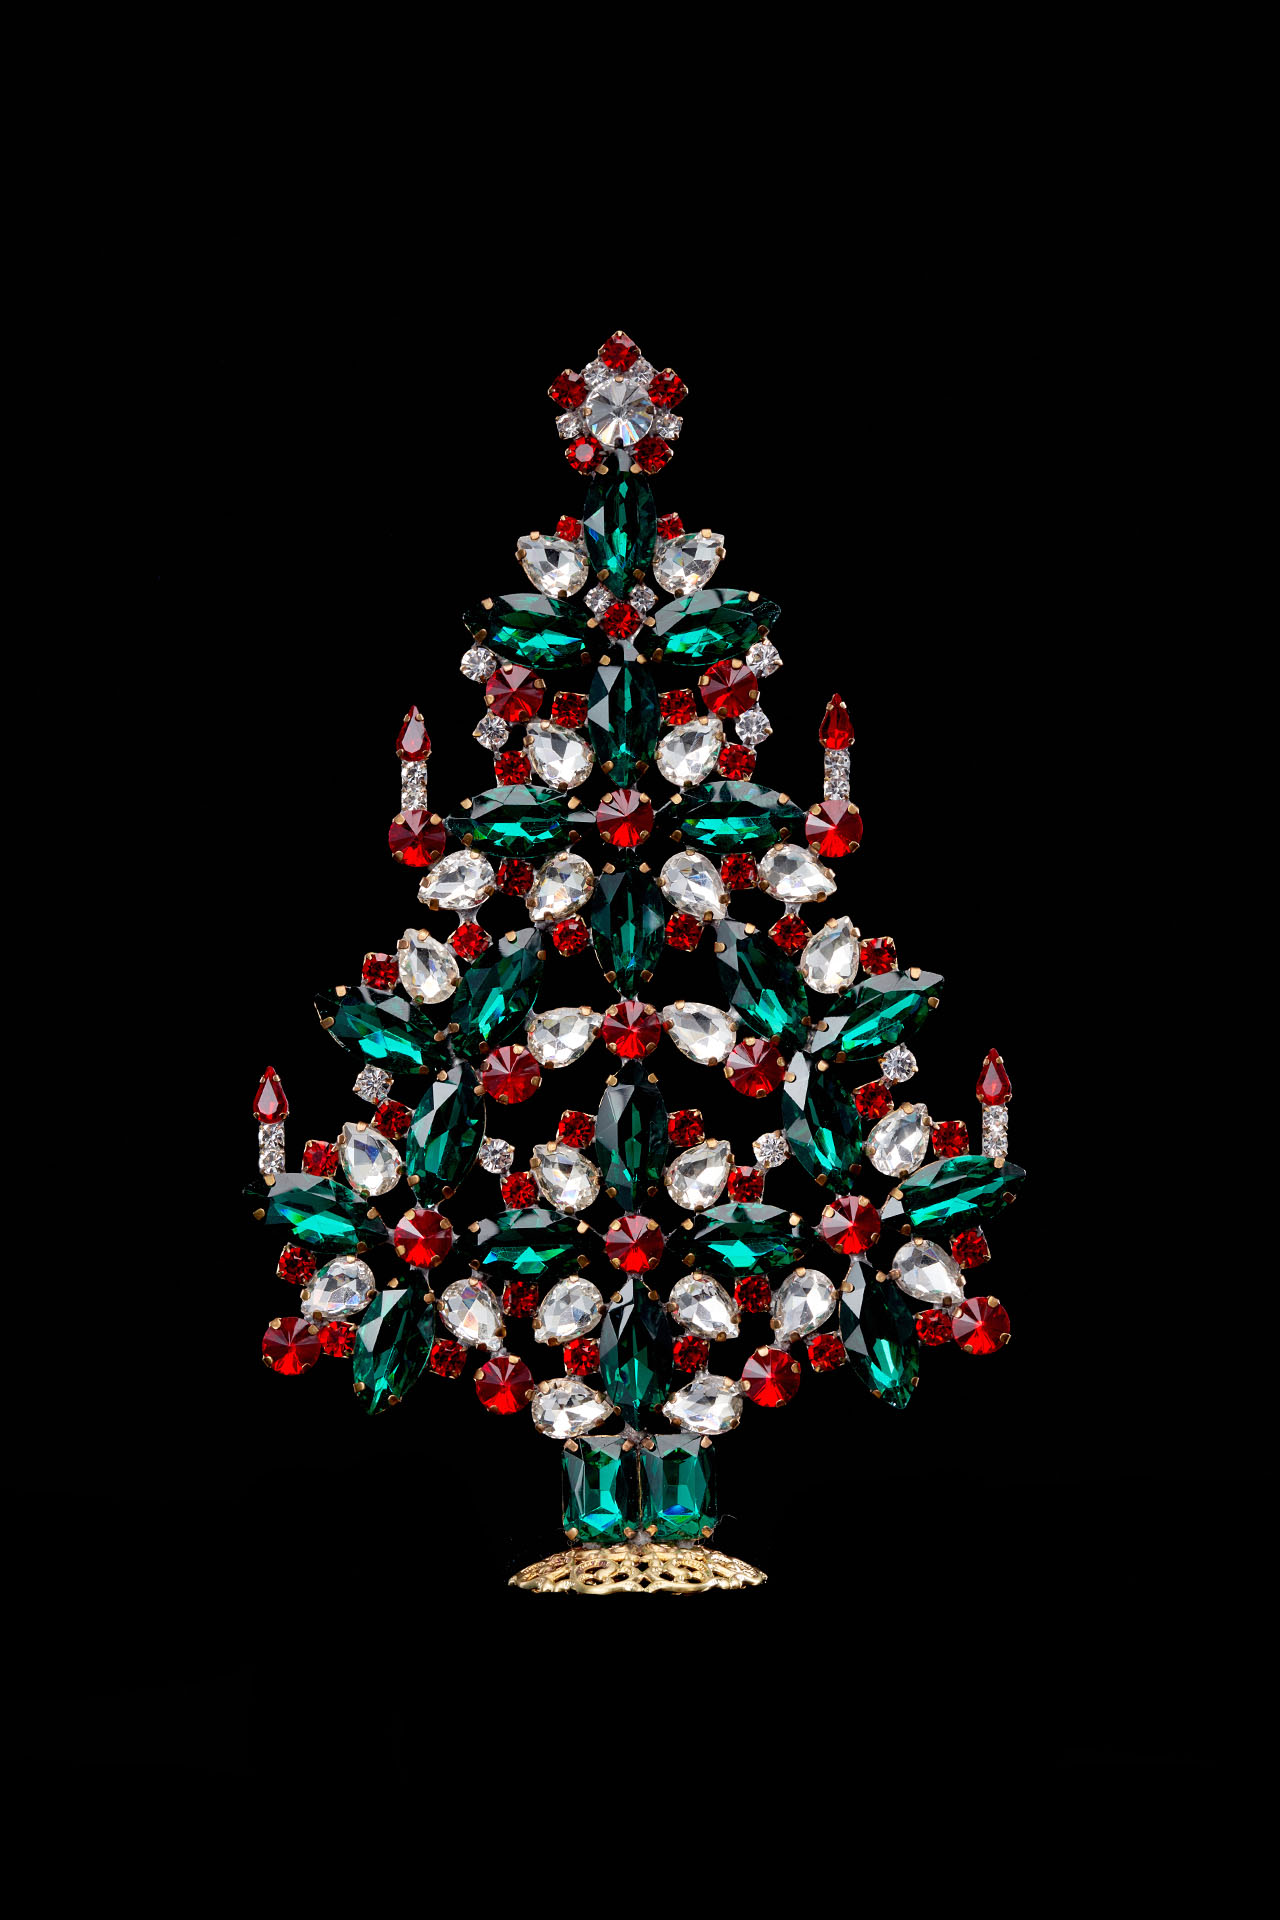 Elegant Czech Xmas Tree, handcrafted with glass ornaments